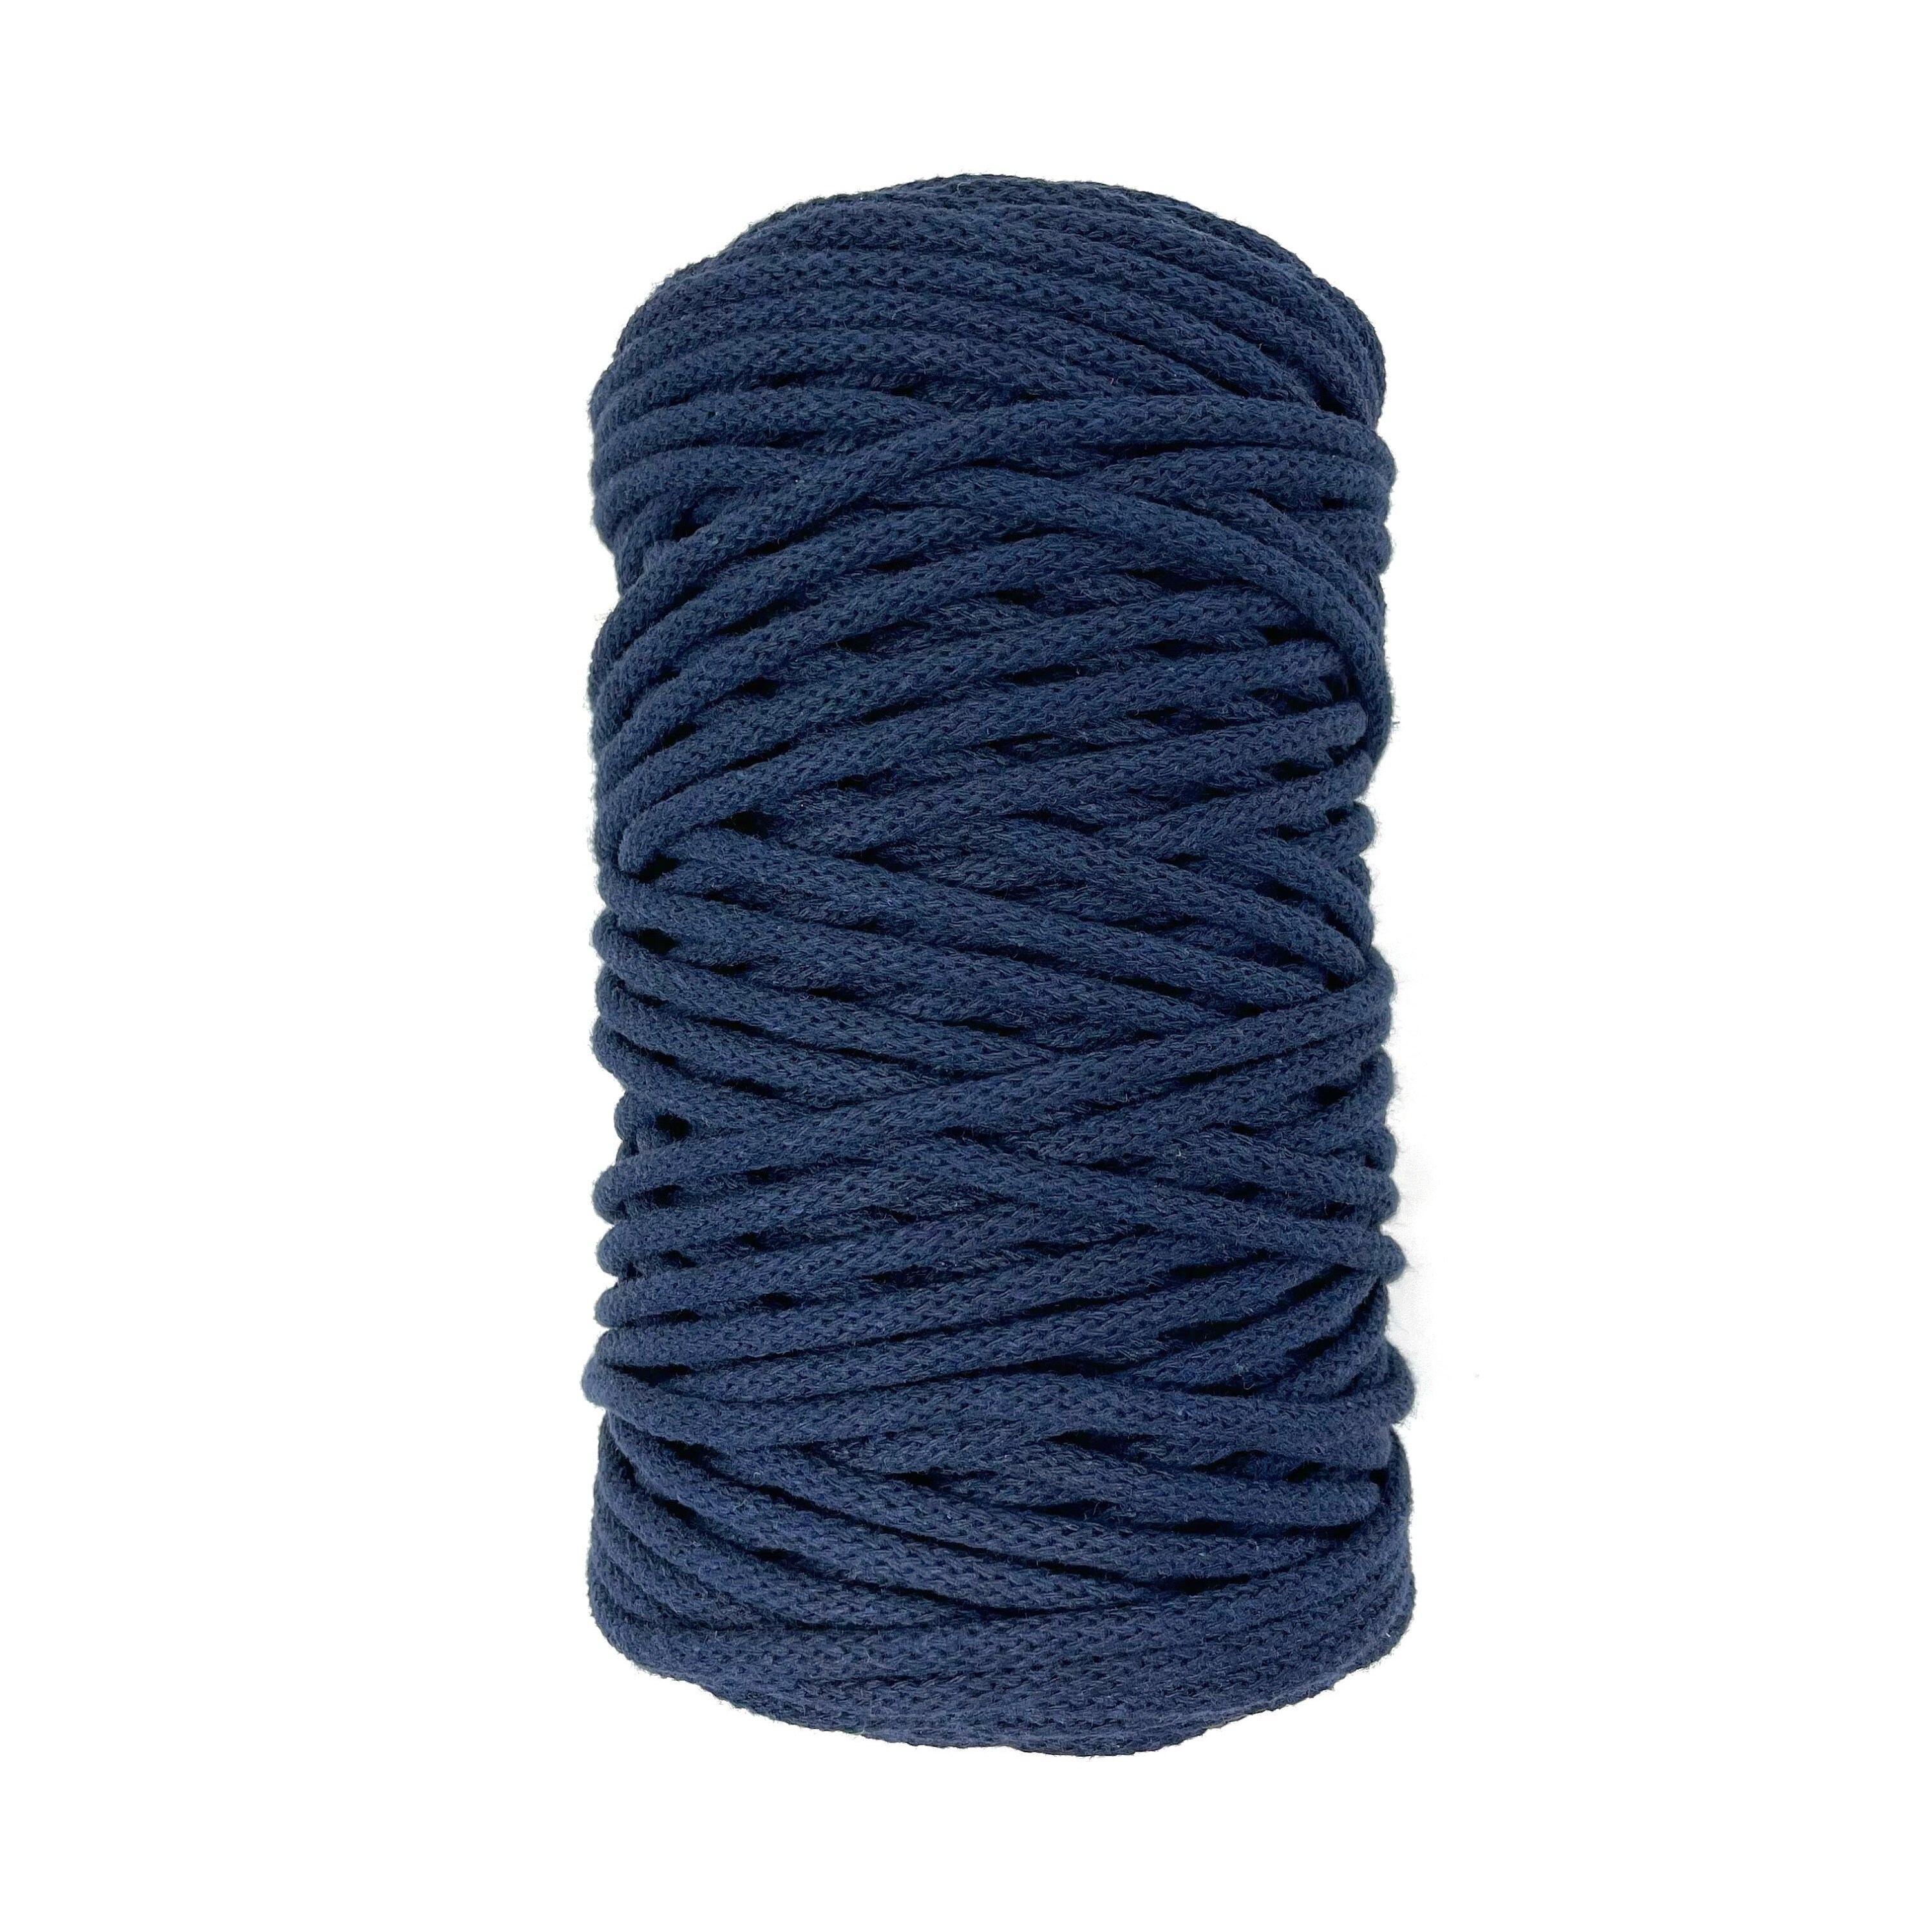 5mm Braided Recycled Cotton Cord NAVY BLUE, Recycled Braided Cotton Cord,  328 Feet, Macramé Cord, Crochet Cord, Weaving Cord 